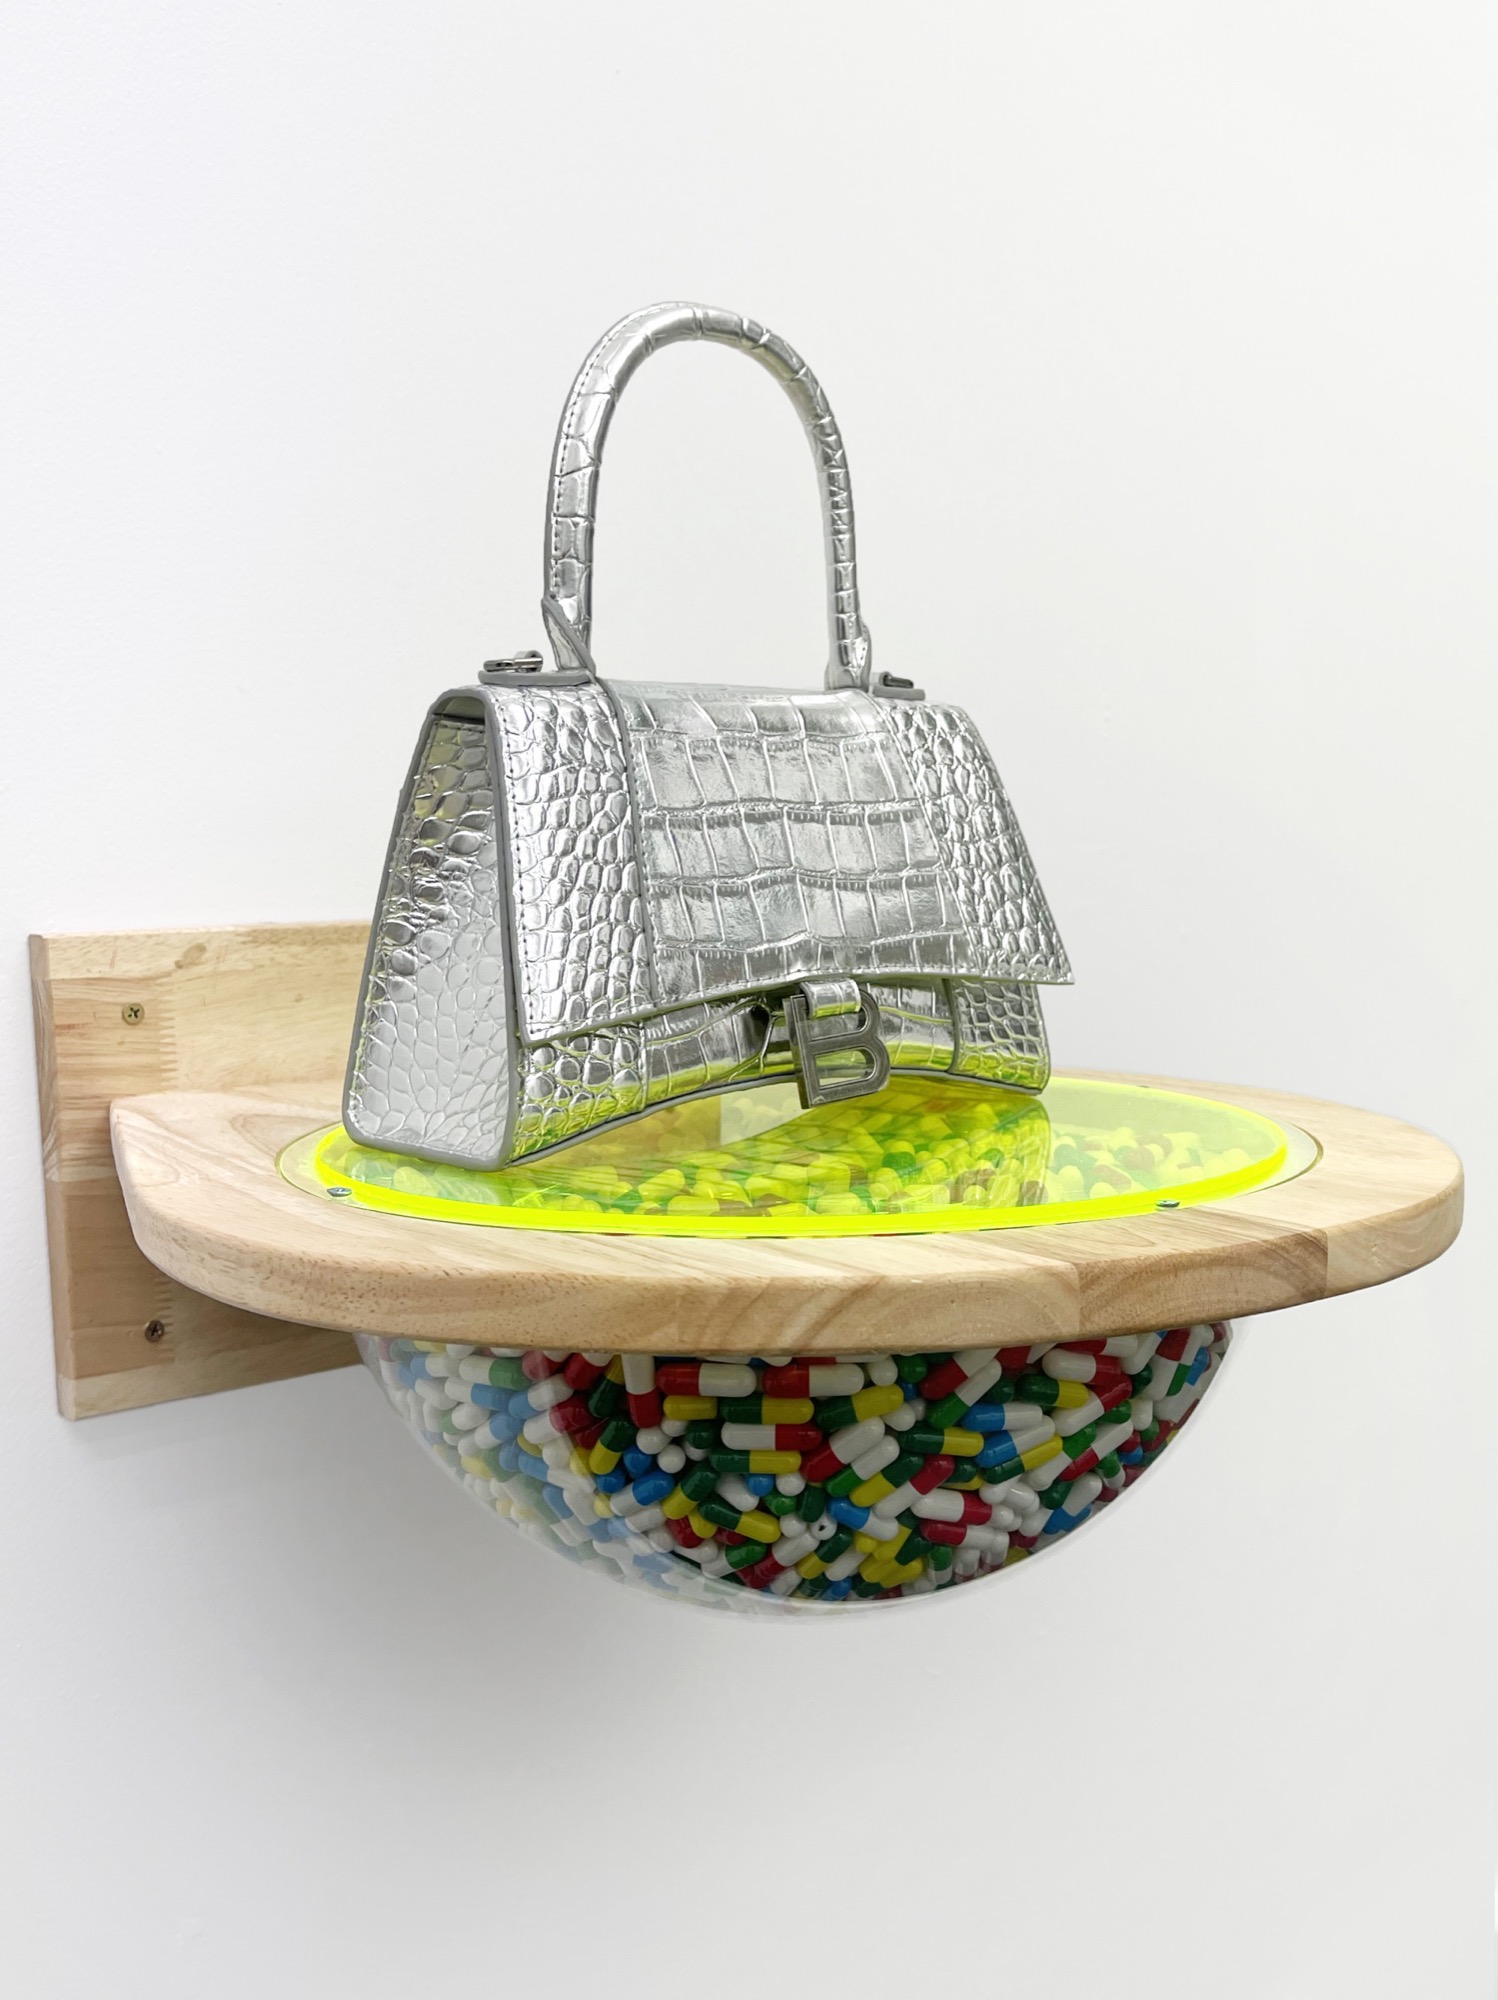 Victoria Todorov, <em>Hollywood is that way</em> (2021). Wood, acrylic, capsules,  Balenciaga Hourglass bag replica, dimensions variable. Courtesy the artist and Discordia.